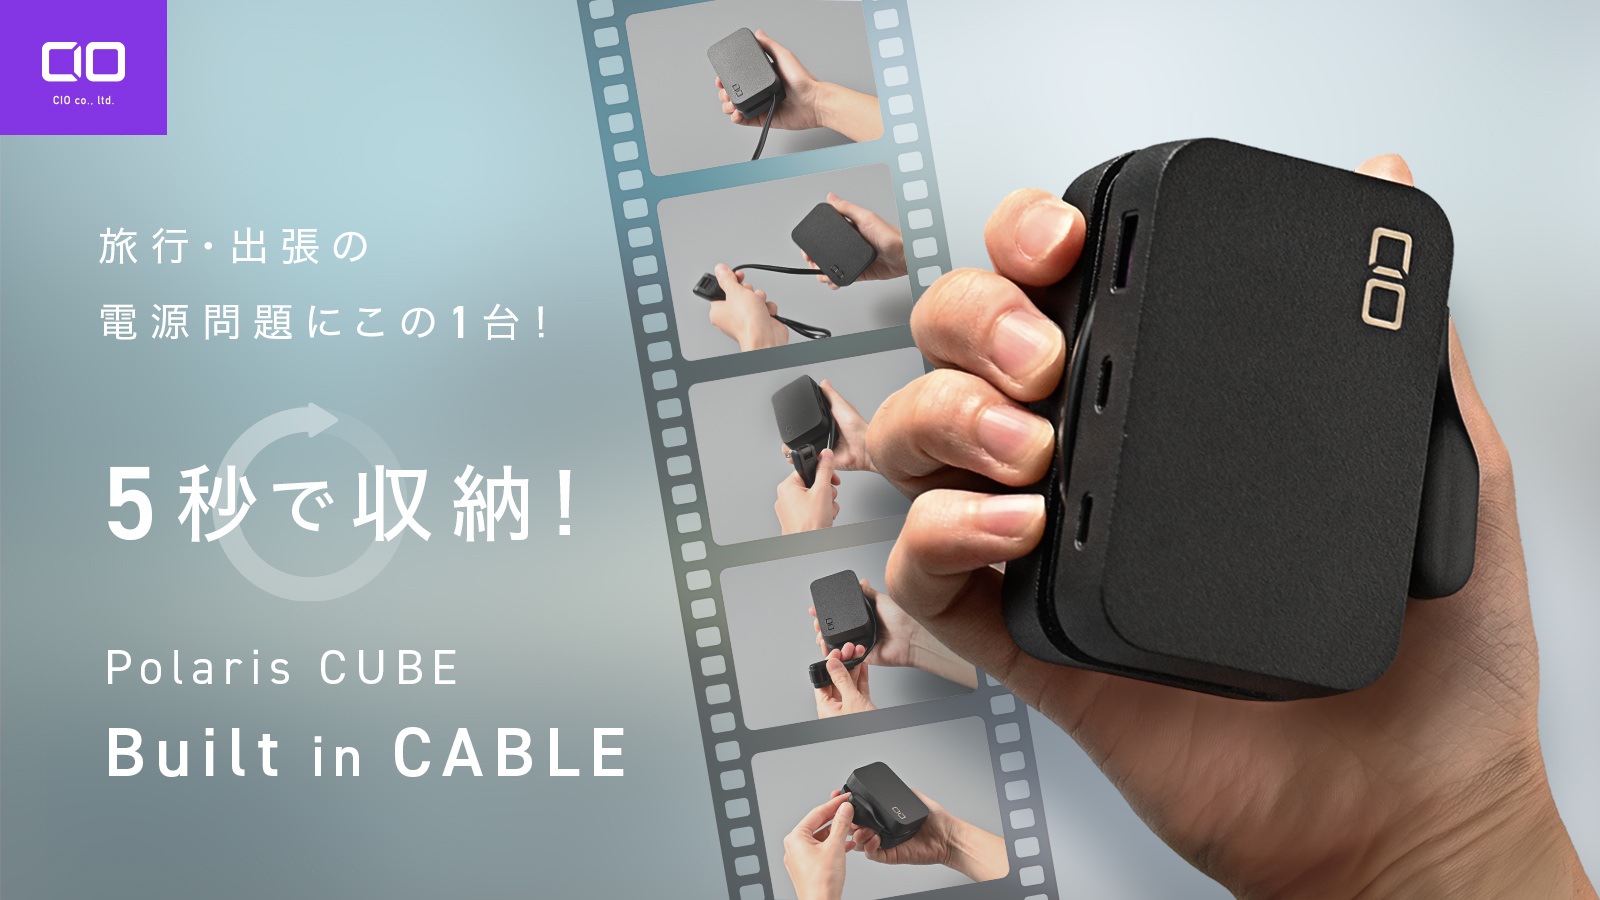 Polaris CUBE built in cable makuake 01